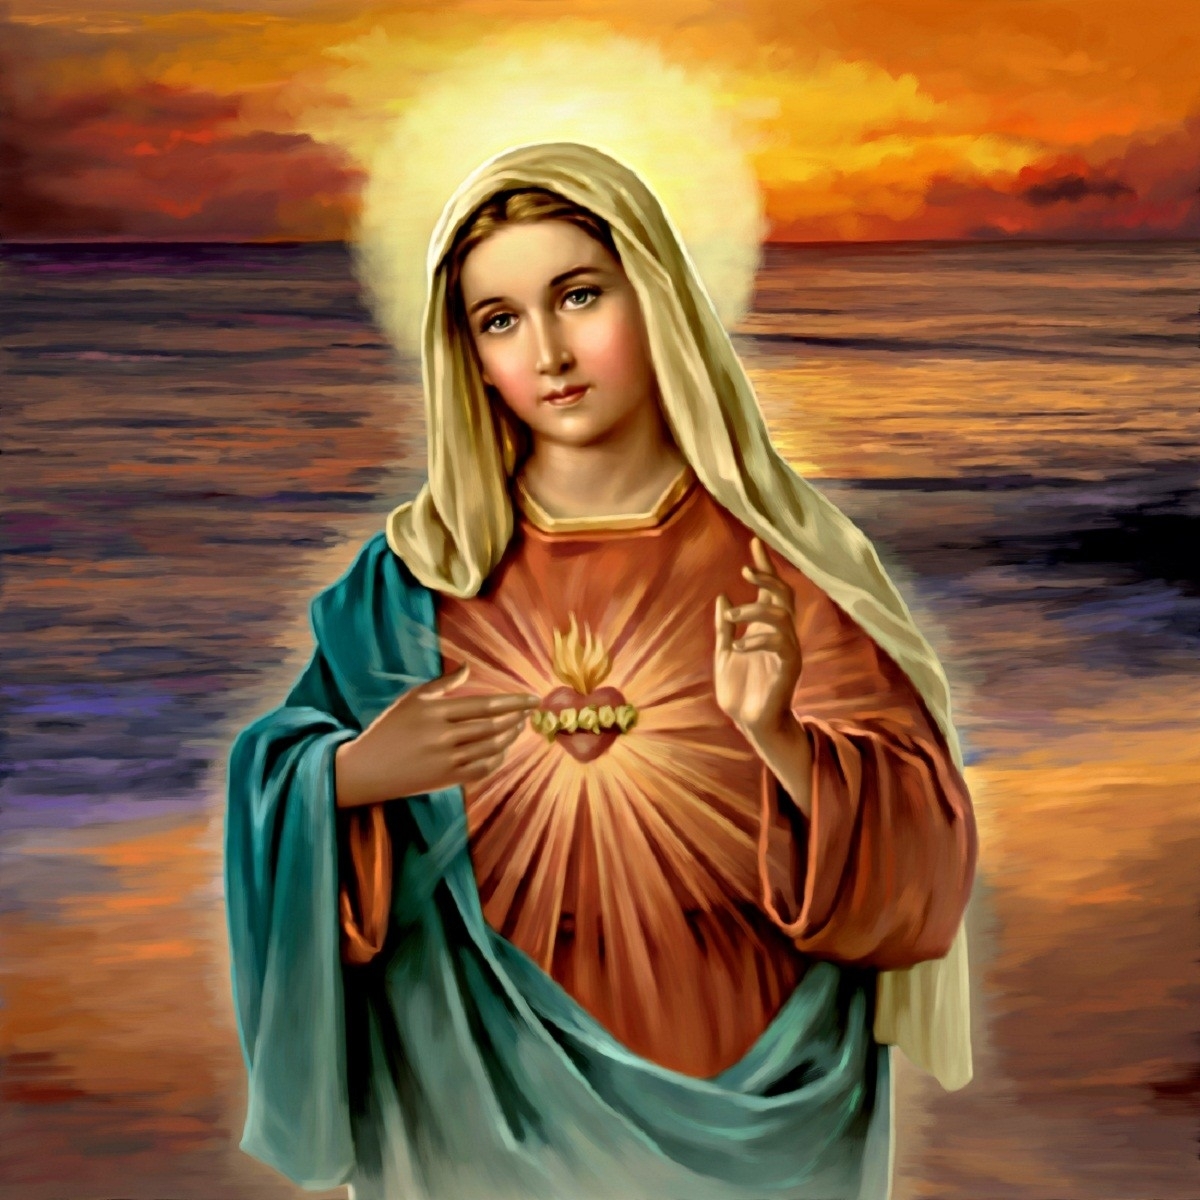 10 New Picture Of Mother Mary FULL HD 1080p For PC Background 2021